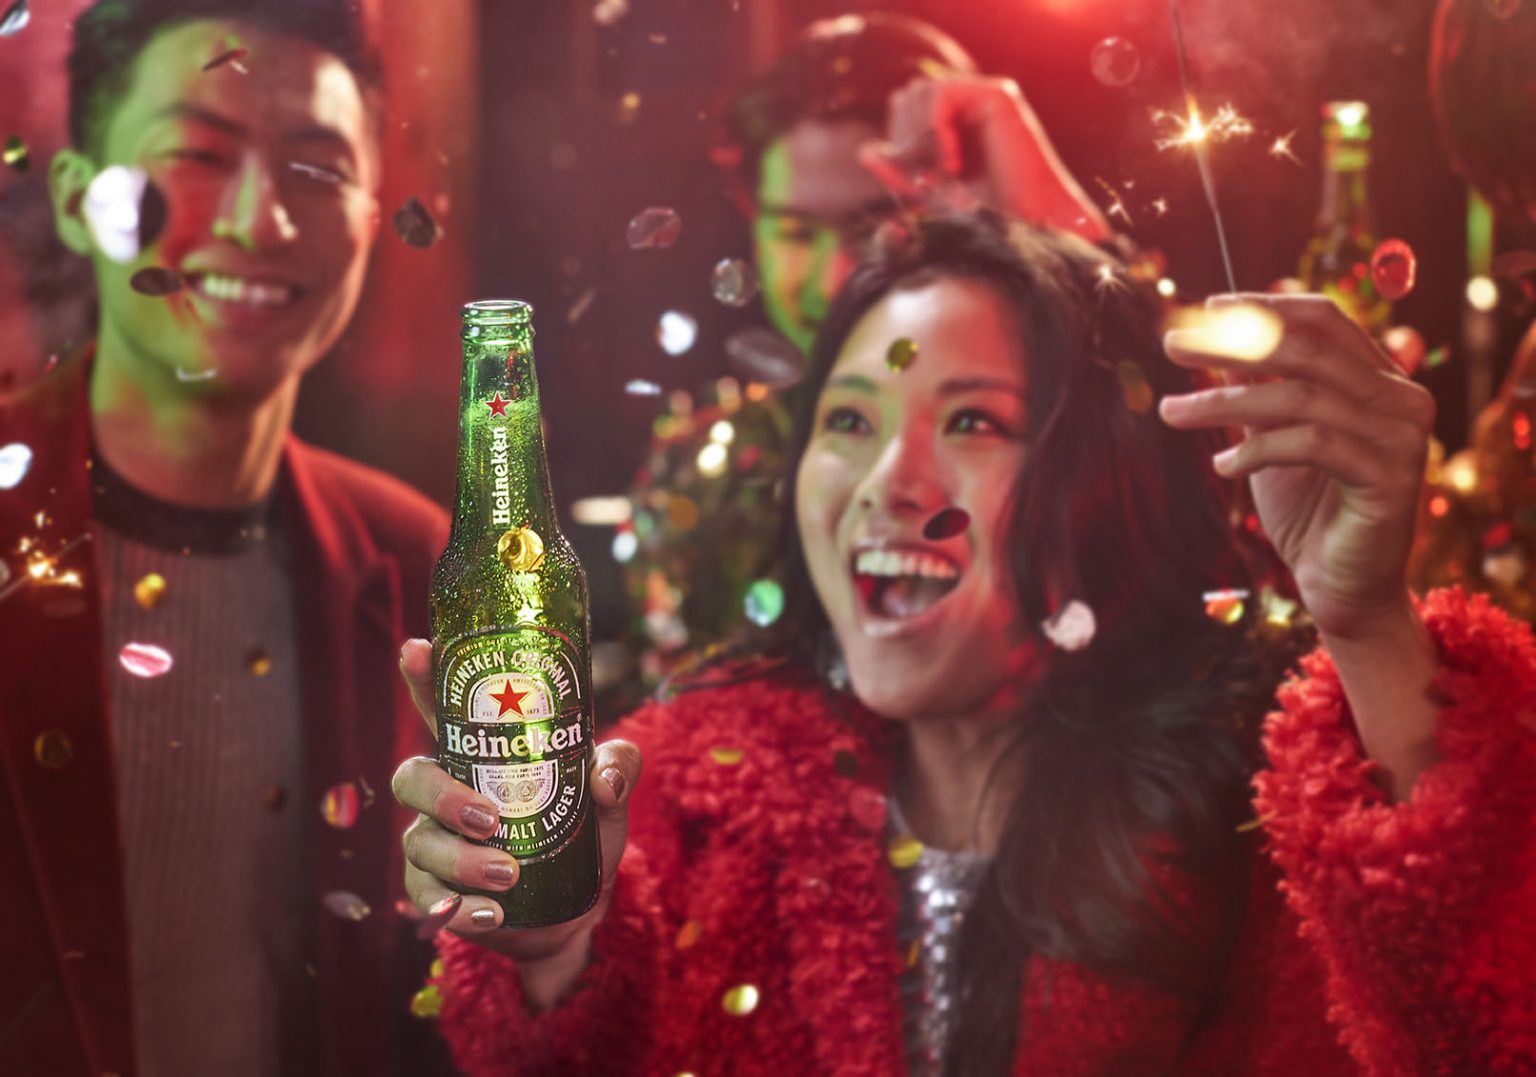 Decoding the secret of success for Gen Z with inspiration from Heineken - Photo 3.